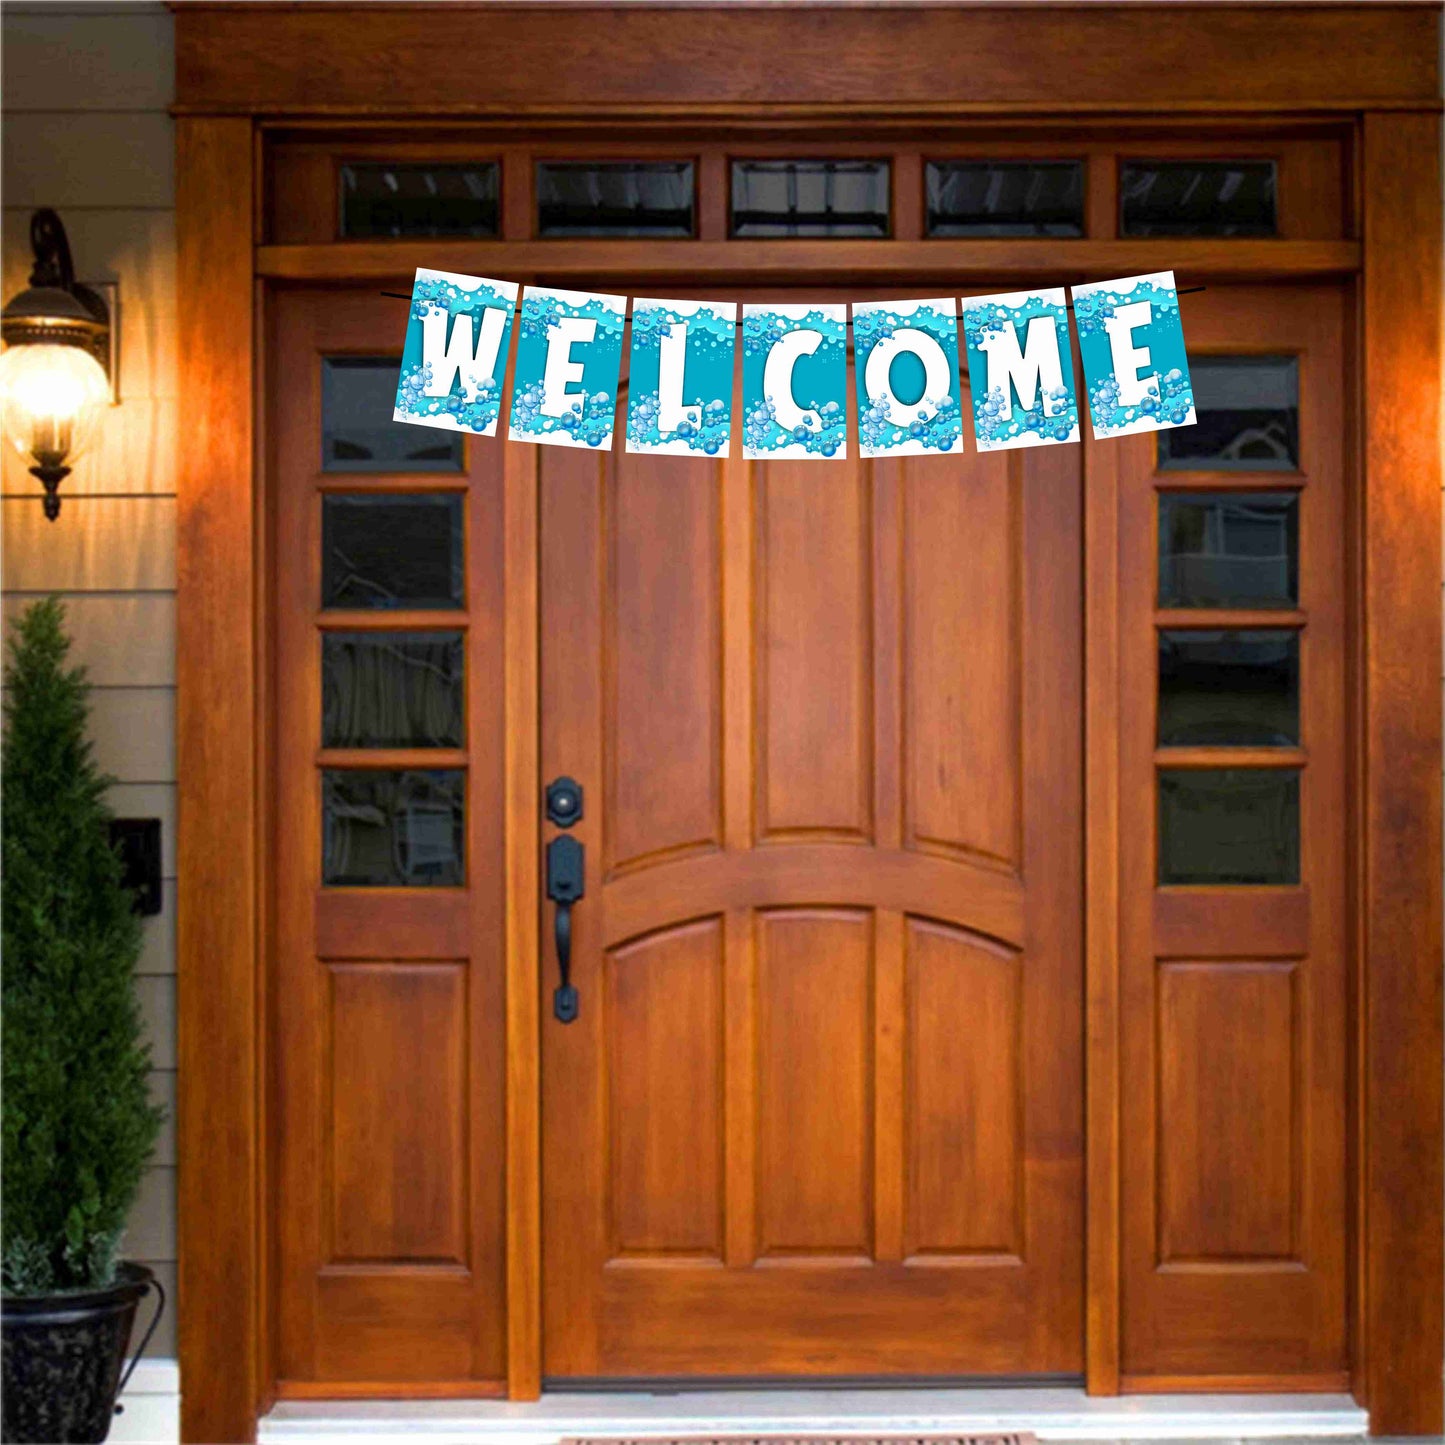 Bubbles Welcome Banner for Party Entrance Home Welcoming Birthday Decoration Party Item